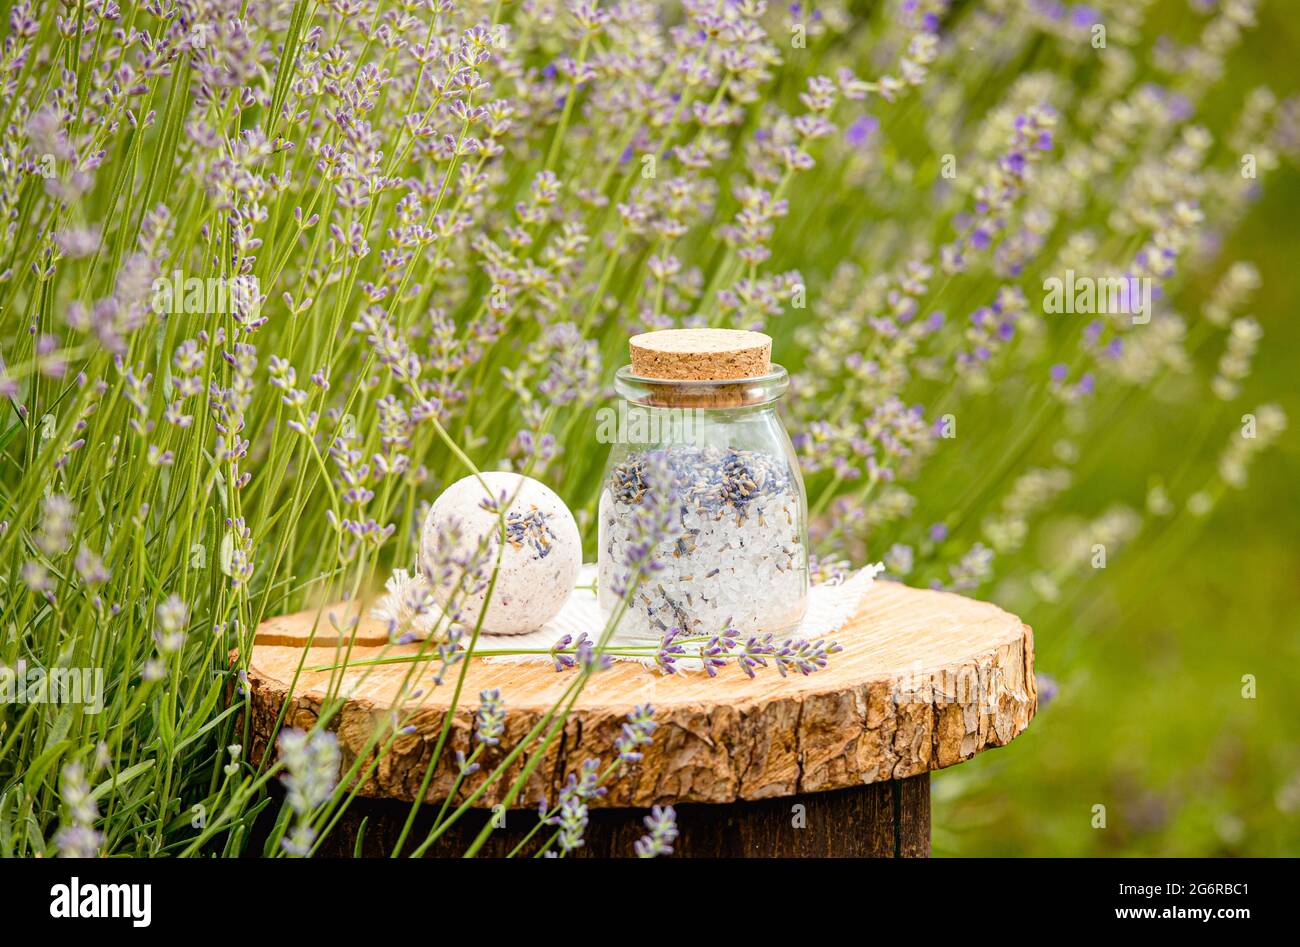 Various homemade lavender flower products bath bomb and bath salt on natural pine tree wood disc tray in lavender field outdoors in summer. Stock Photo